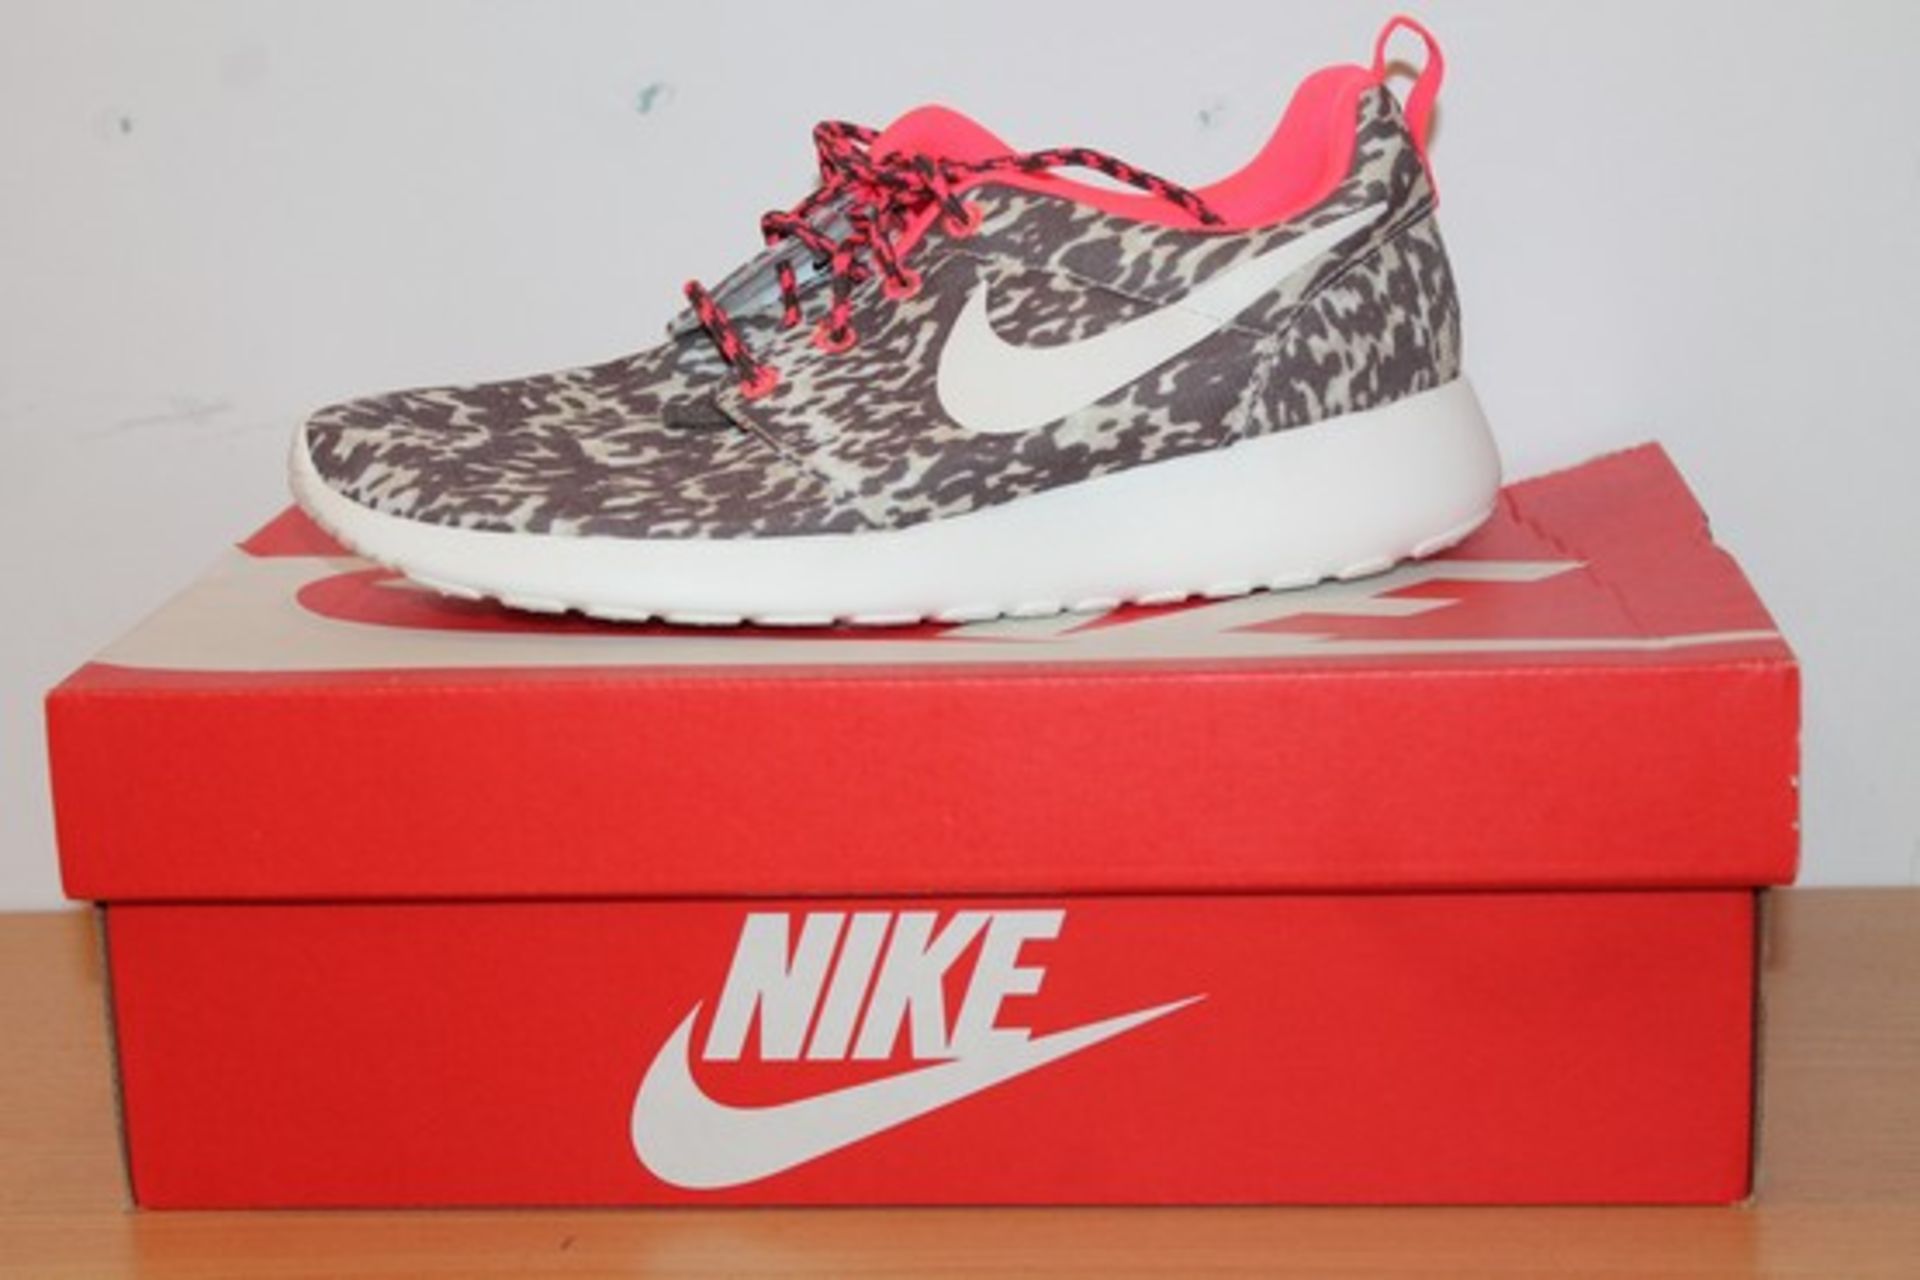 BOXED BRAND NEW NIKE TRAINERS, ROSHERUN PRINT, UK SIZE-5, RRP-£39.99 (DS-CLIP 03/02/15)